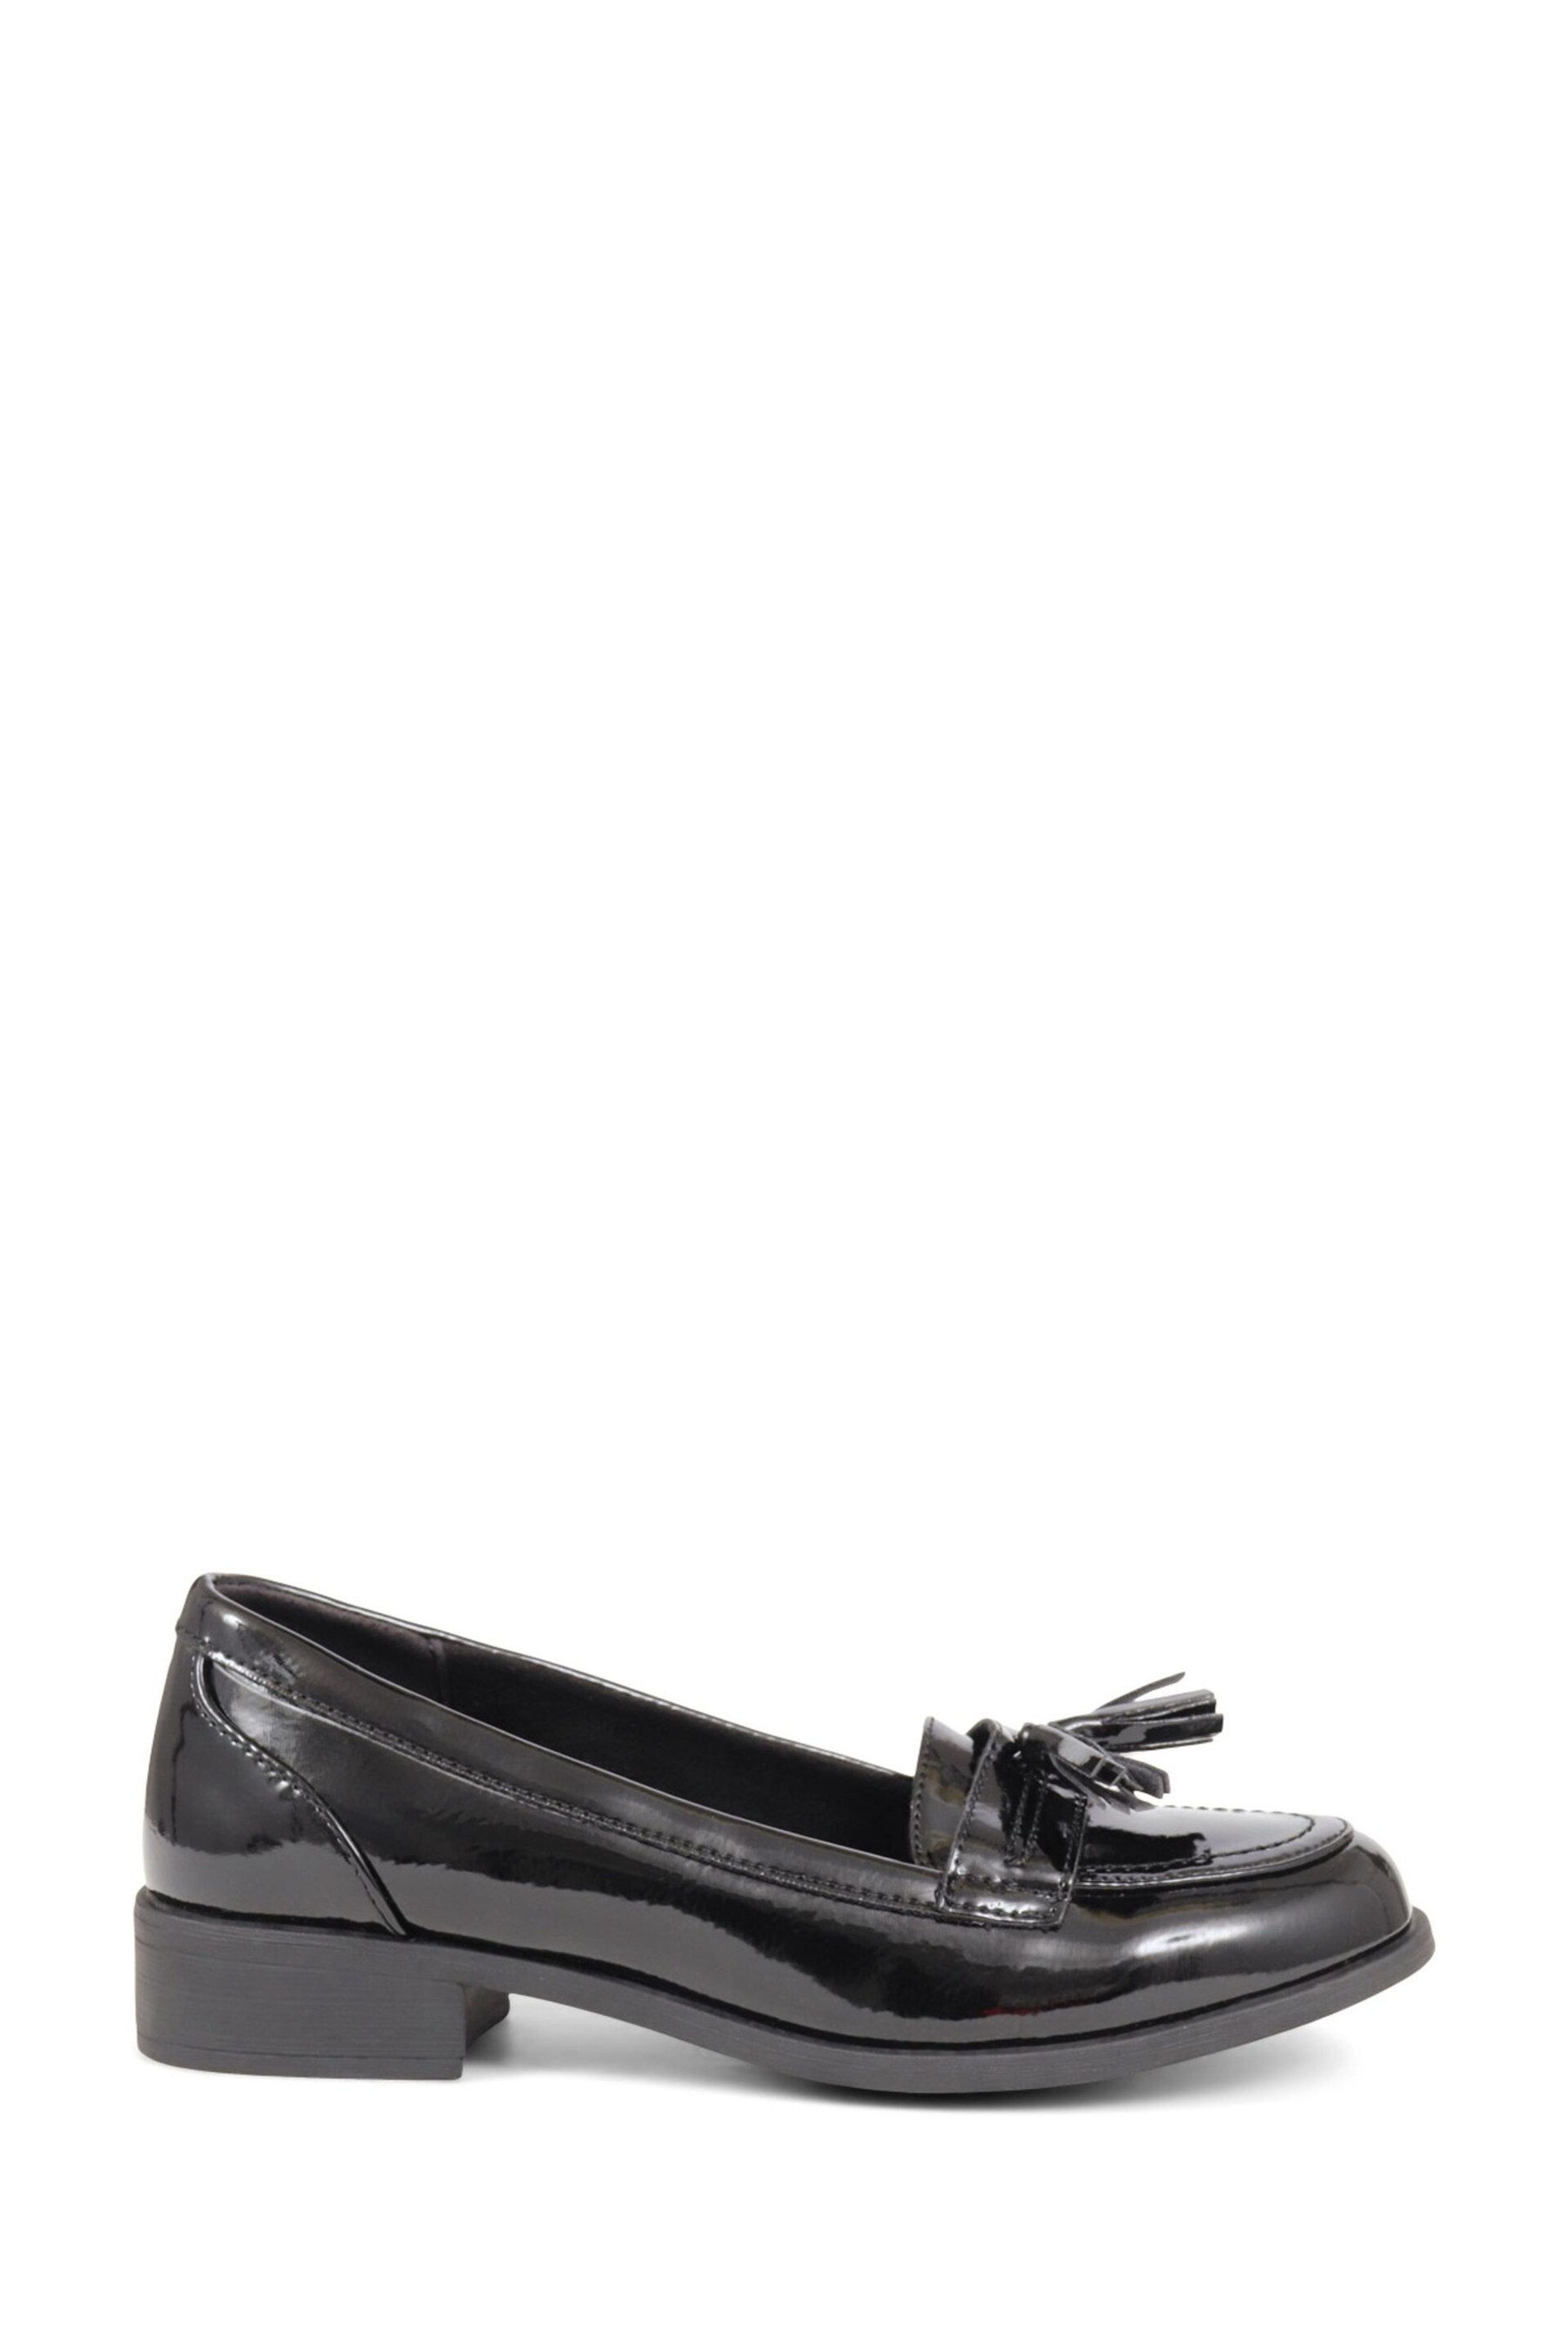 Pavers Smart Patent Black Loafers - Image 1 of 5